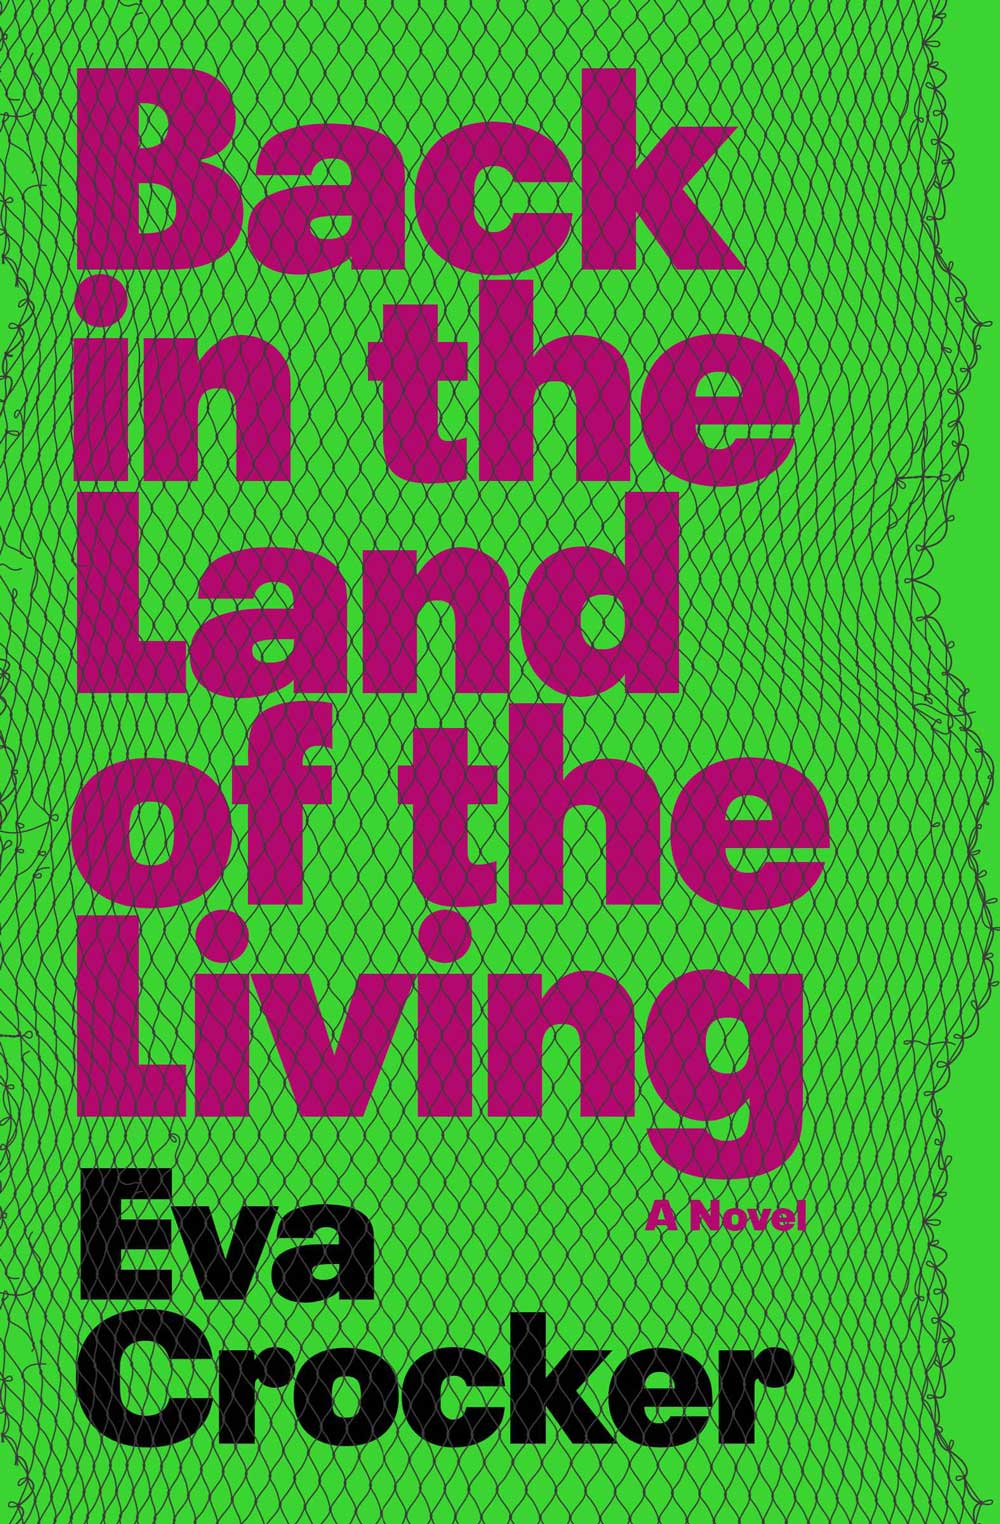 "Back in the Land of the Living" written in magenta on a bright green background layered under a small fishnet pattern.